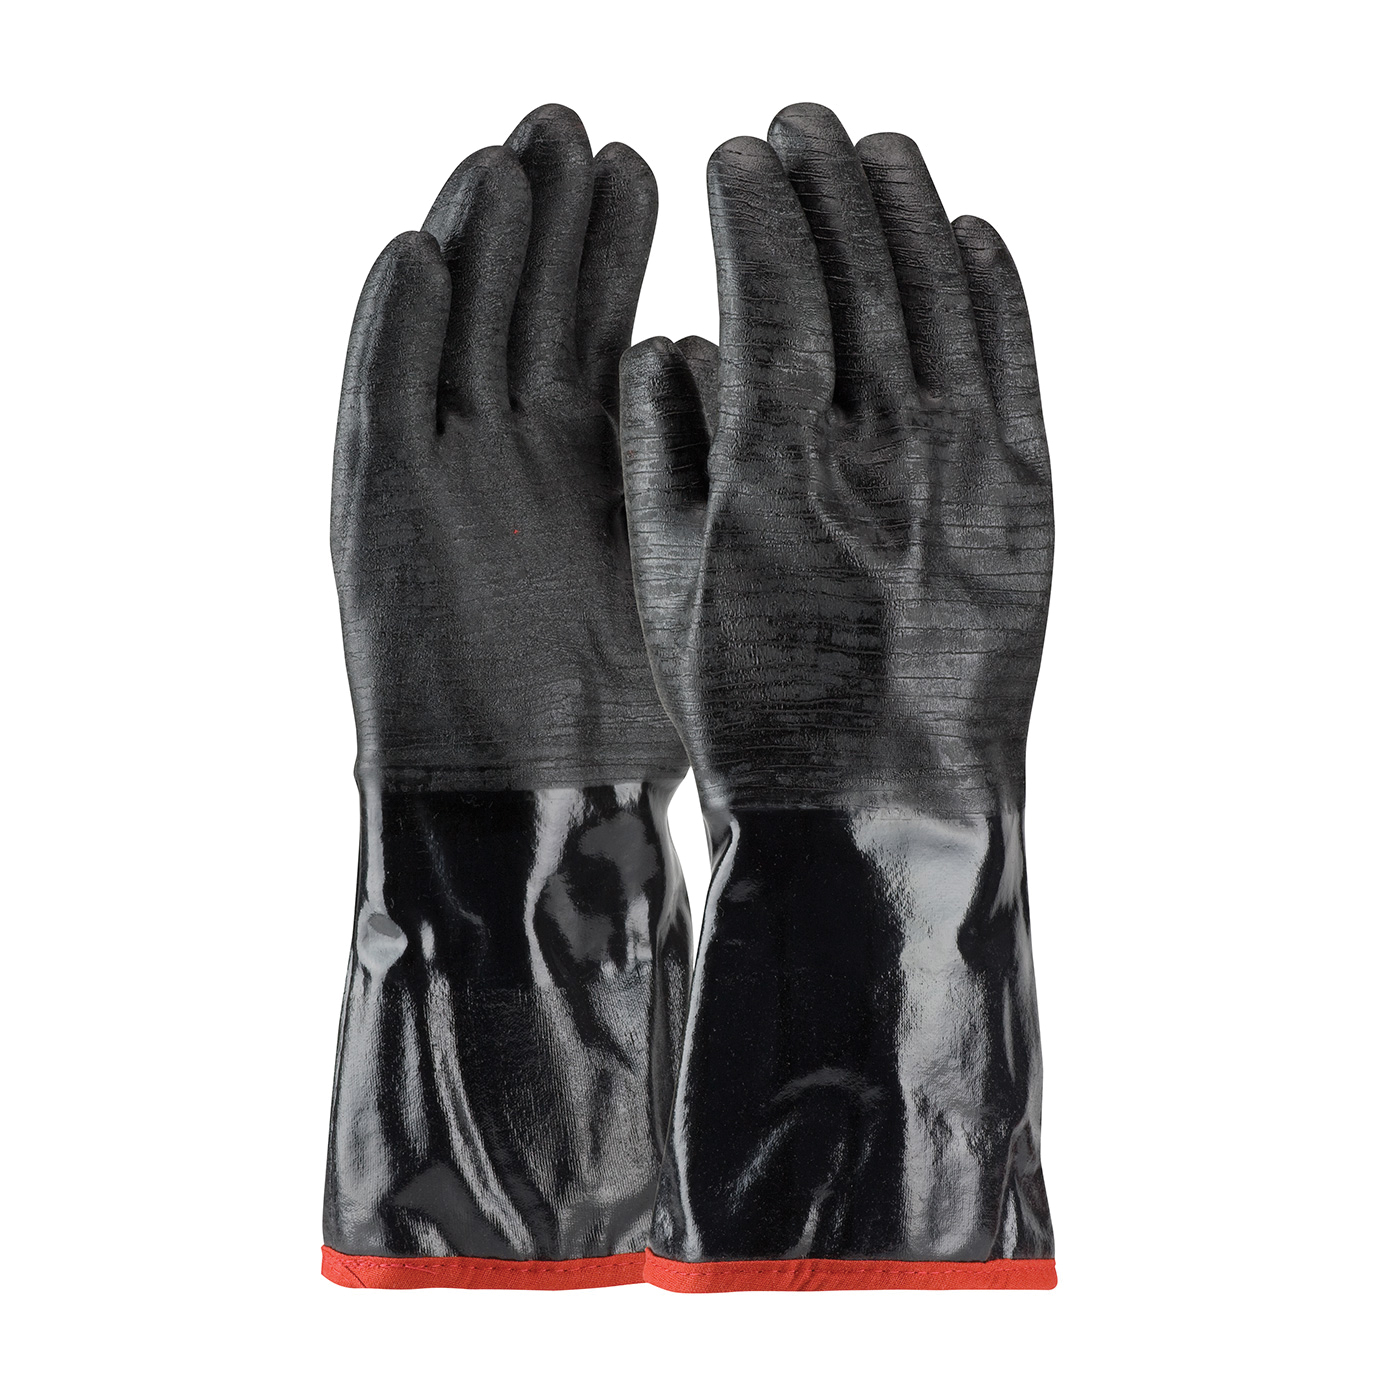 PIP® 57-8643R ChemGrip® Insulated Chemical-Resistant Gloves, L, Cotton/Neoprene, Black, Foam Lining, 14 in L, Resists: Abrasion, Cut, Puncture and Tear, Supported Support, Gauntlet Cuff, 3 mm THK